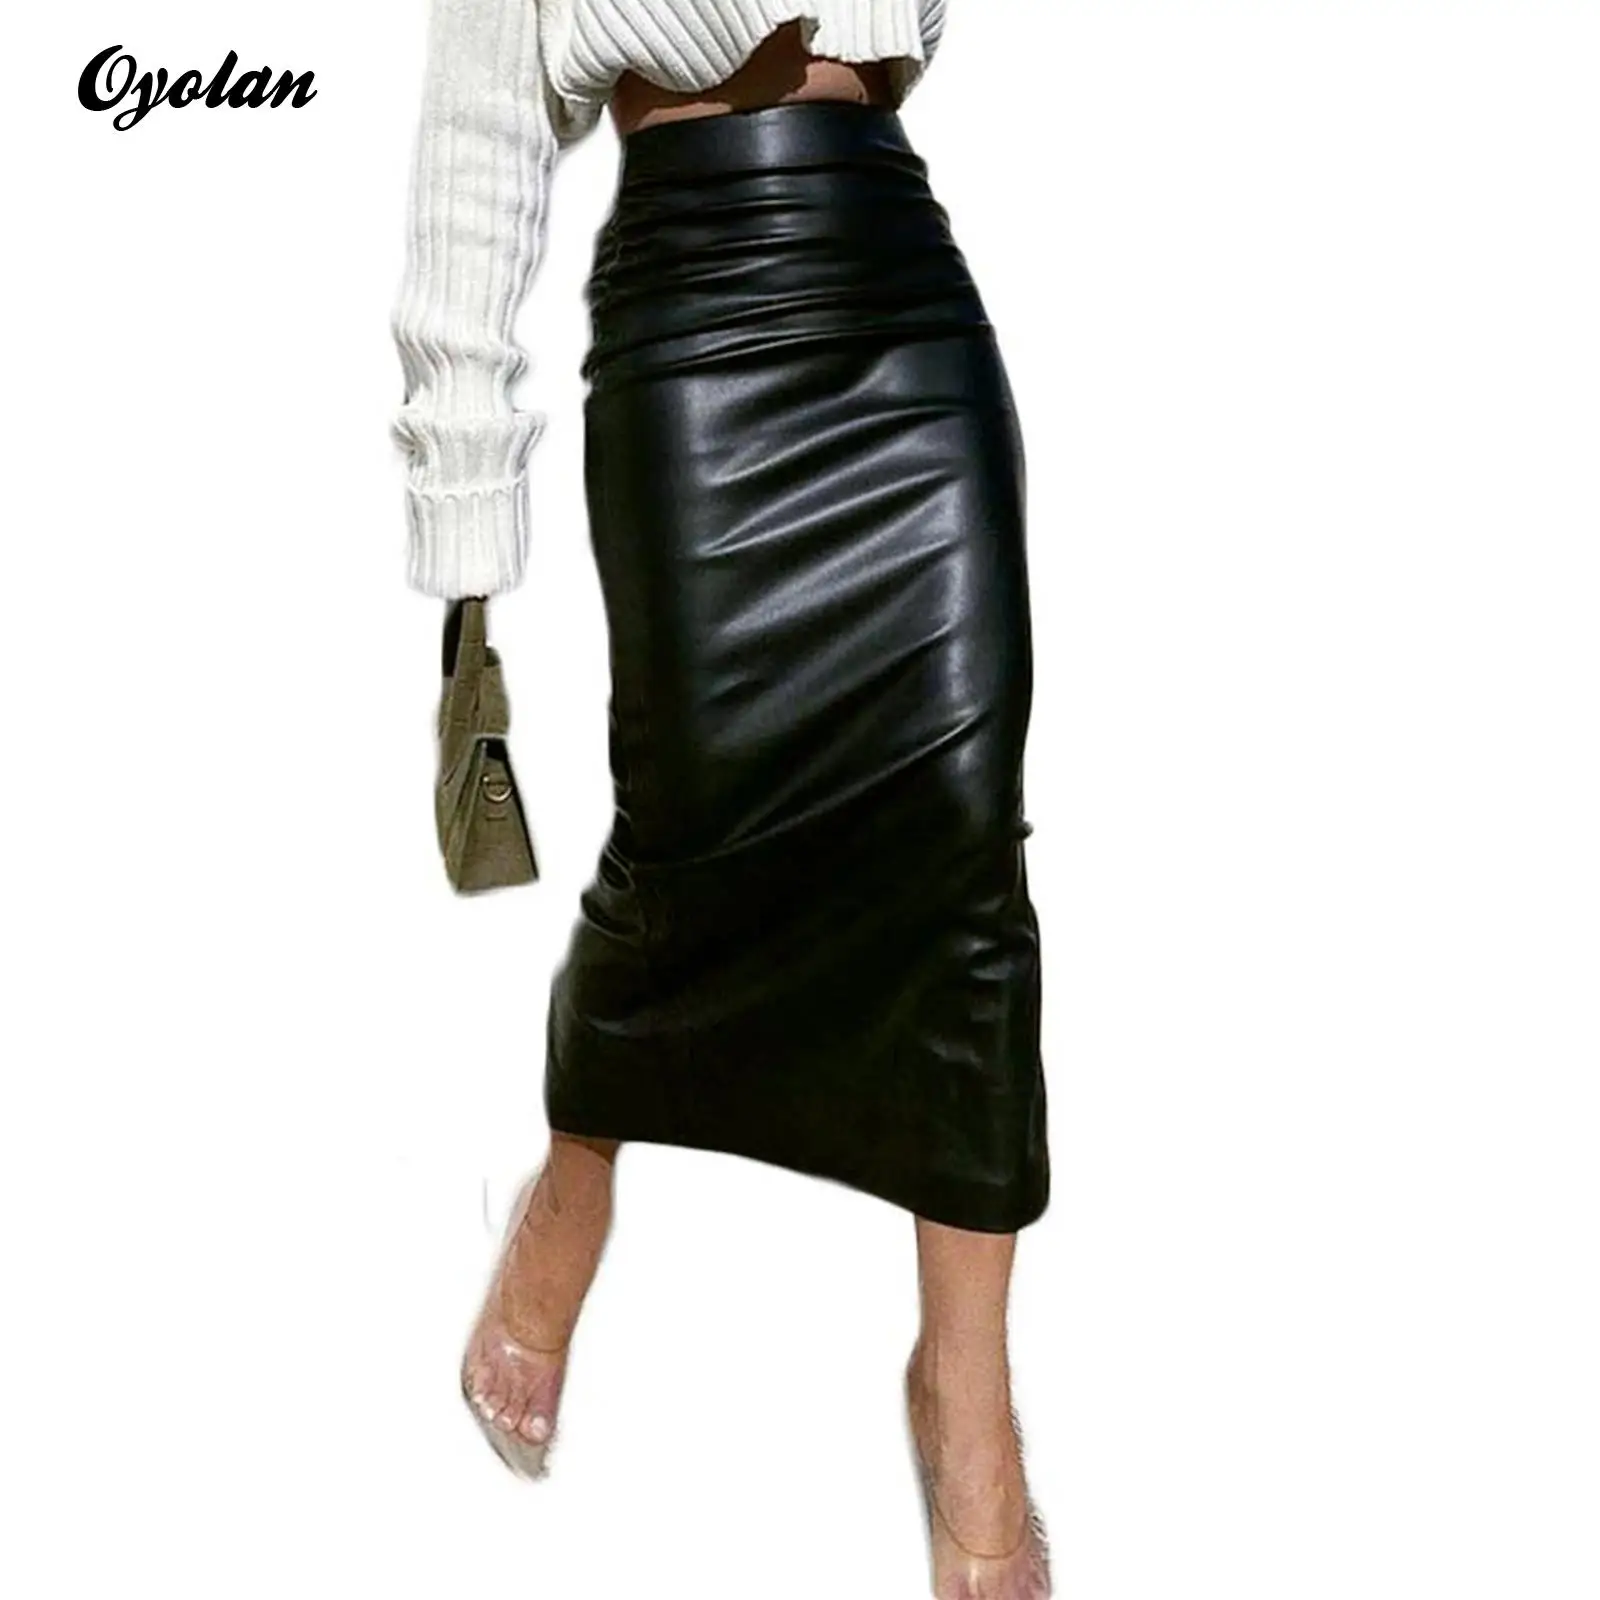 

Womens PU Leather Ruched Bodycon Midi Skirt High Waist Midi Office Pencil Skirts Zipper Back Slit Rave Party Clubwear